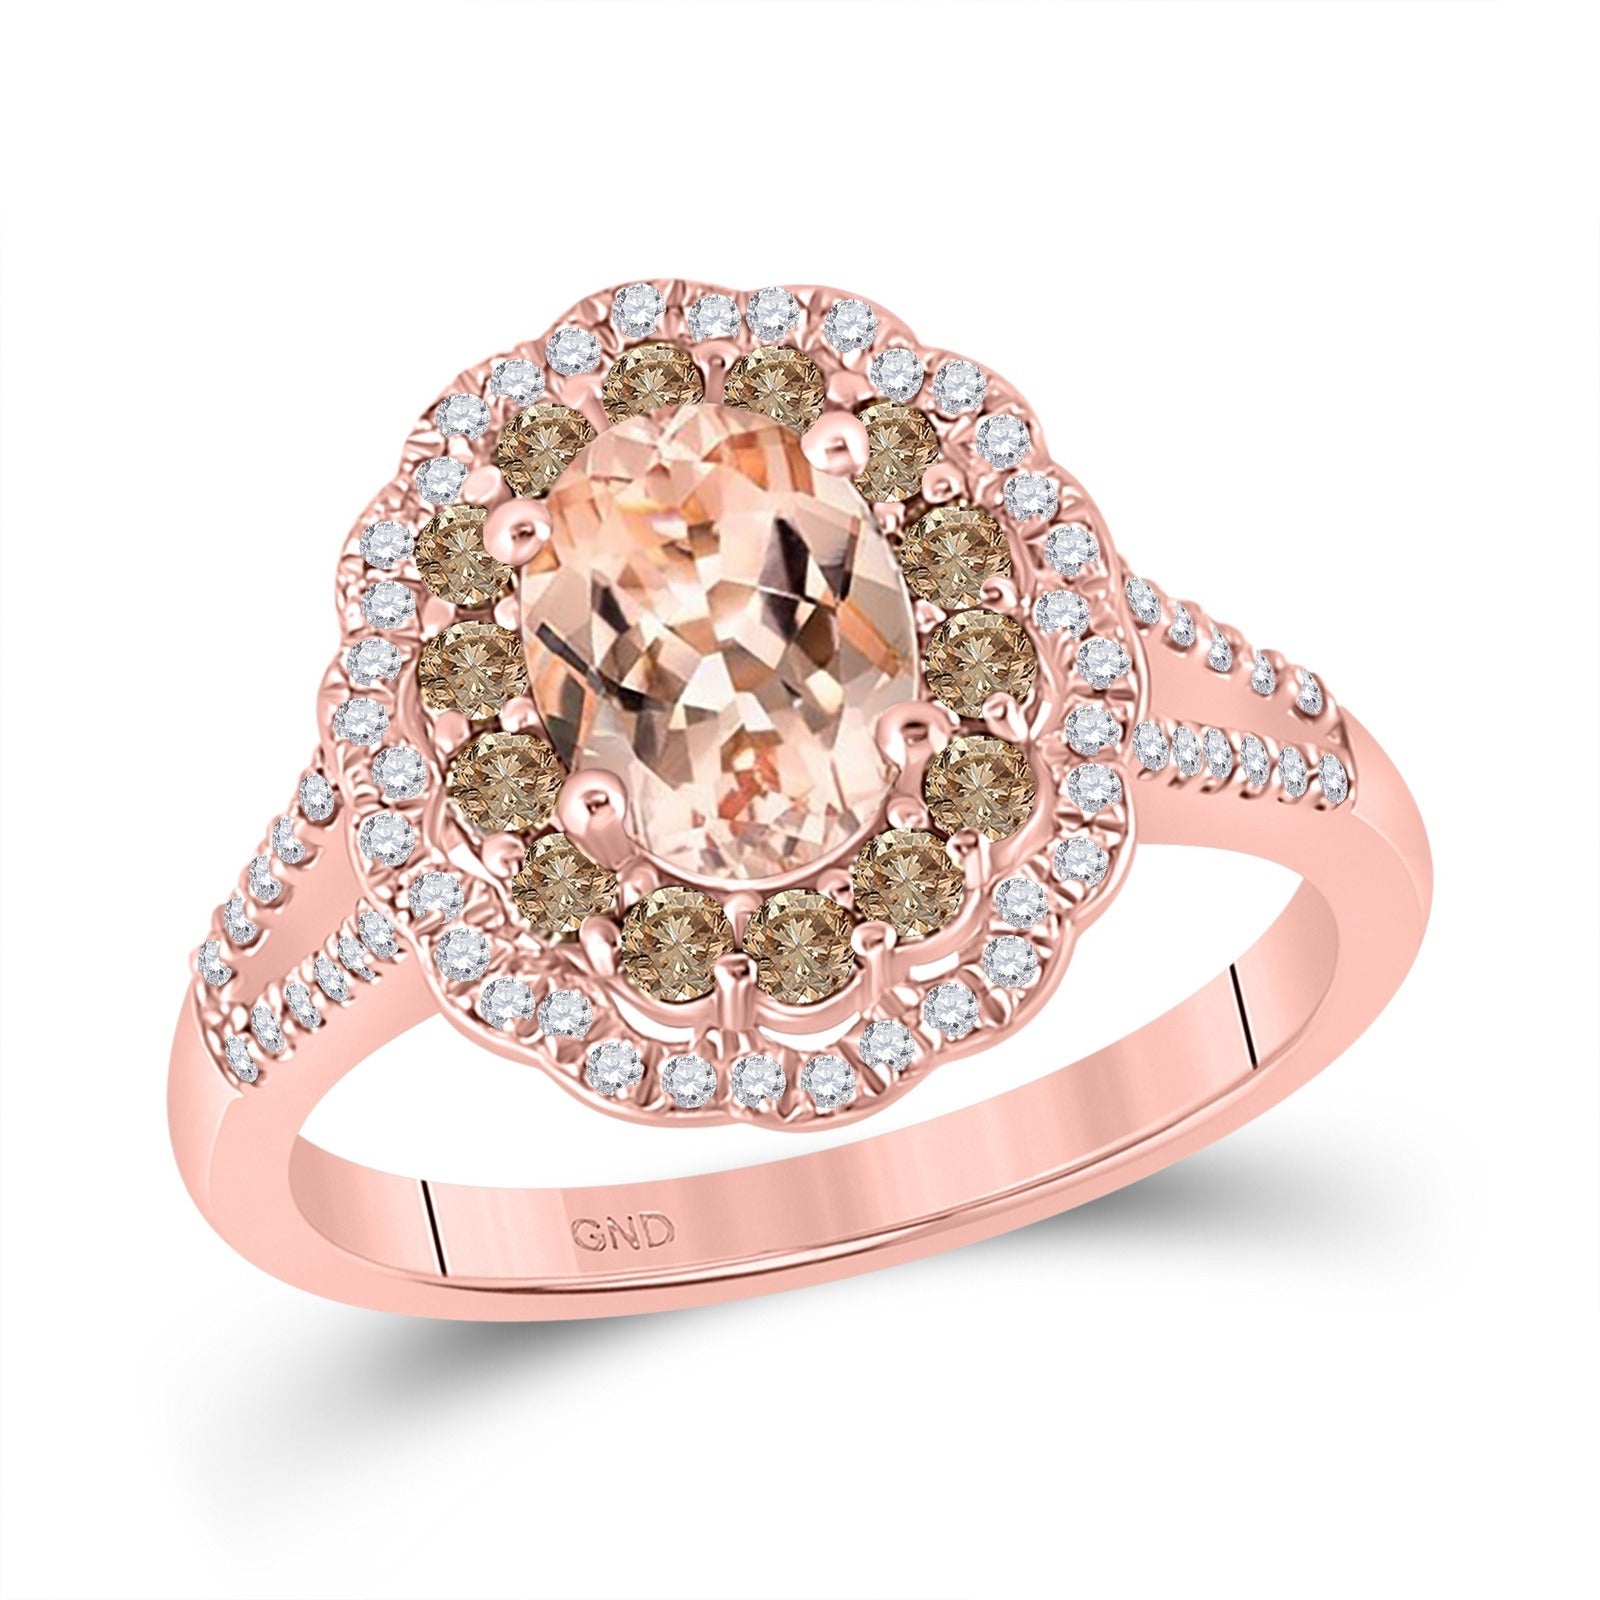 10kt Rose Gold Round Morganite Solitaire Bridal Wedding Engagement Ring 1-3/8 Cttw